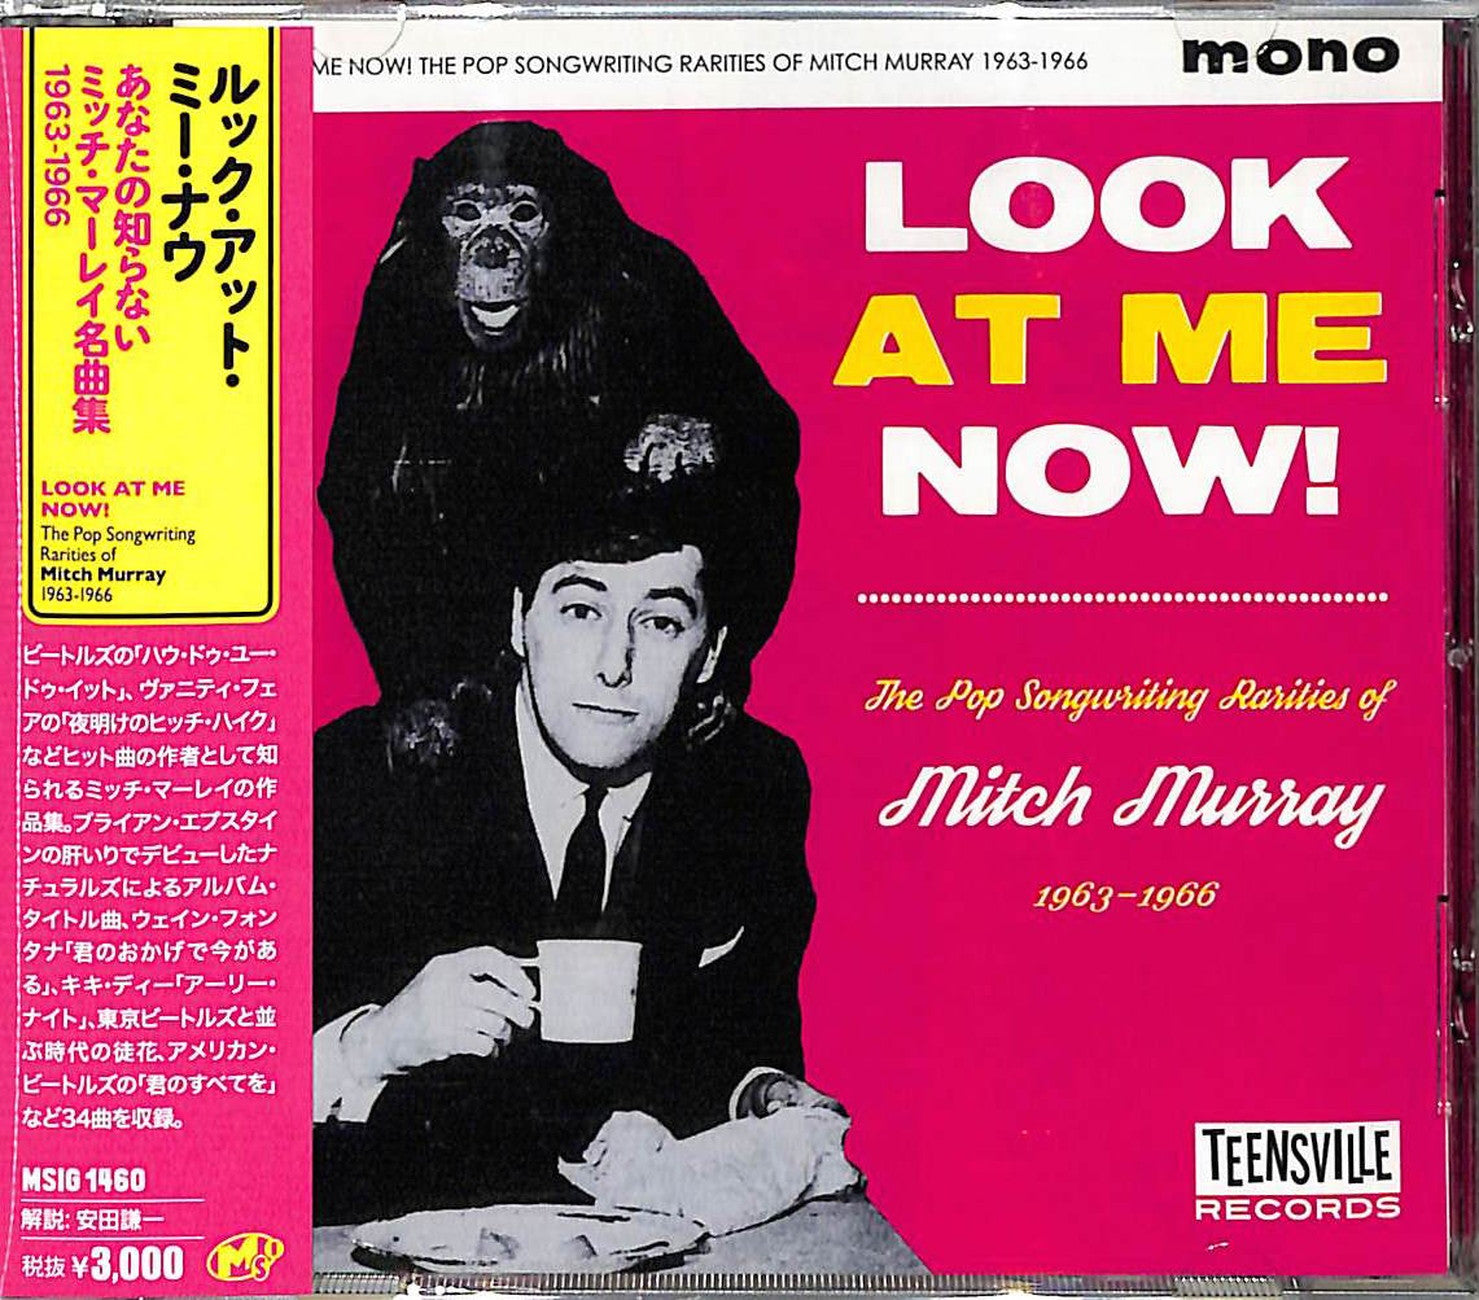 V.A. - Look At Me Now! The Pop Songwriting Rarities Of Mitch Murray 19 – CDs  Vinyl Japan Store 1960s, 2021, CD, Jewel case, Pop, V.A. 1960s CDs